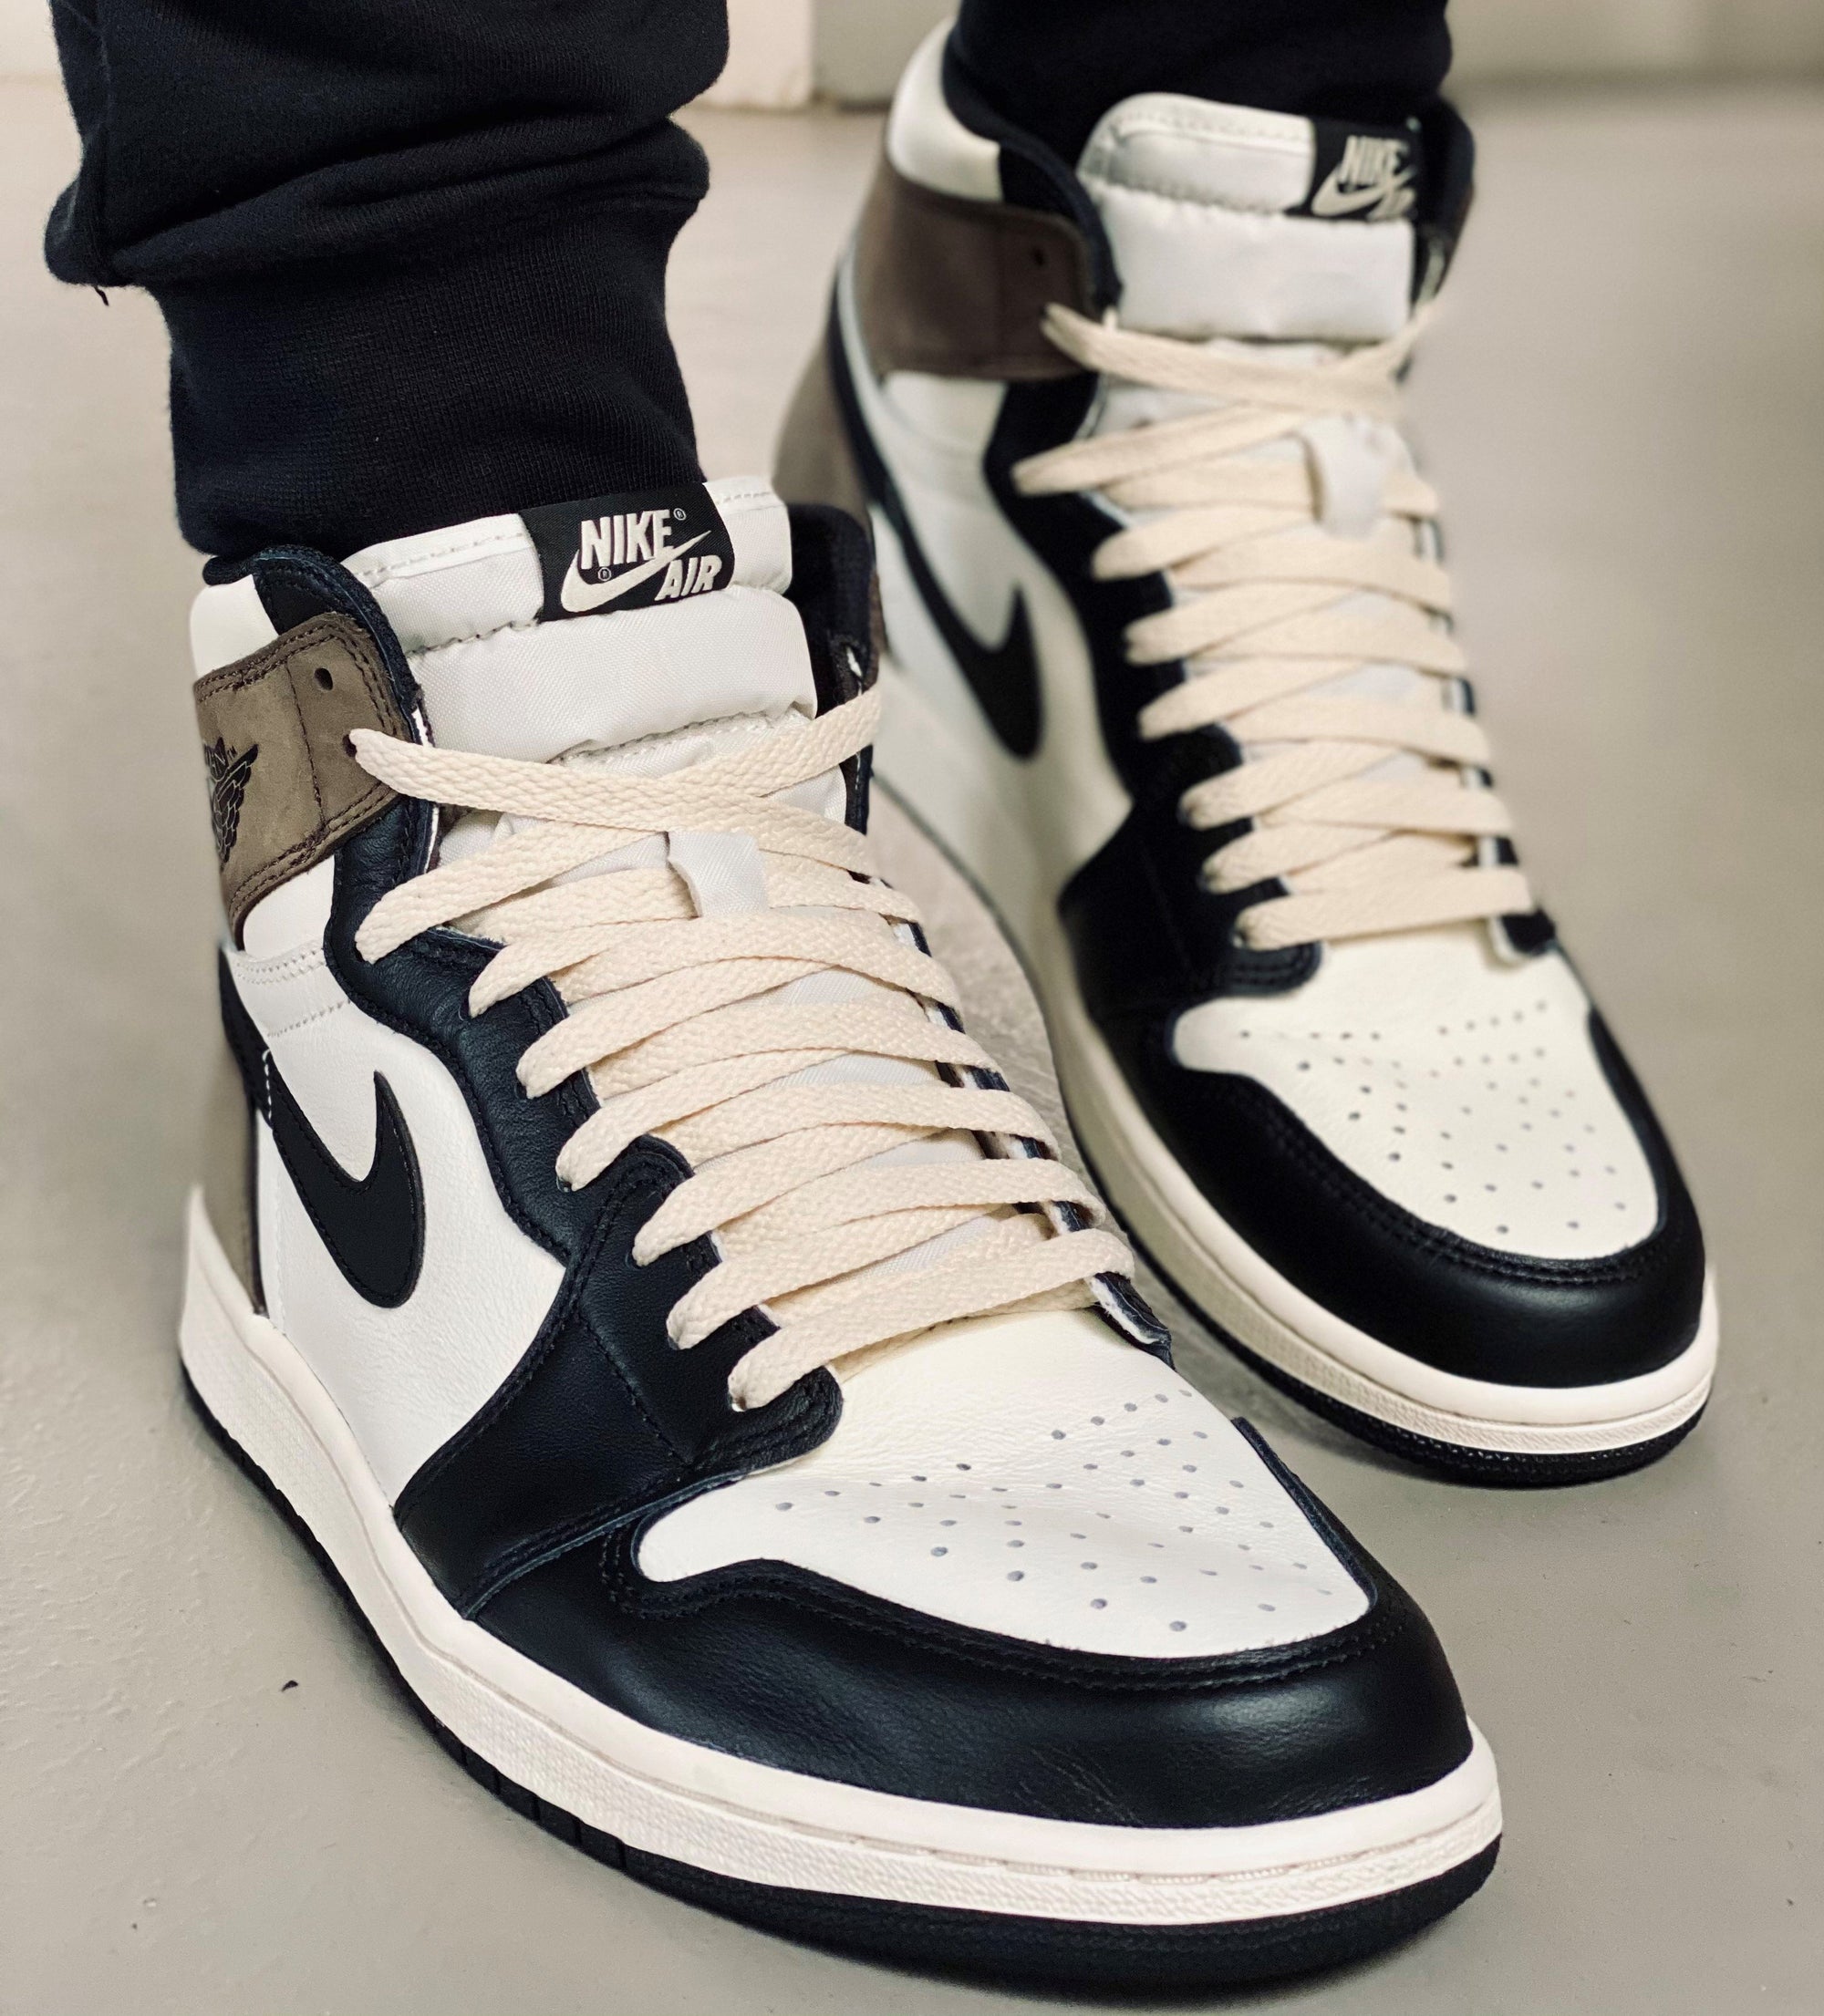 how long are the jordan 1 laces